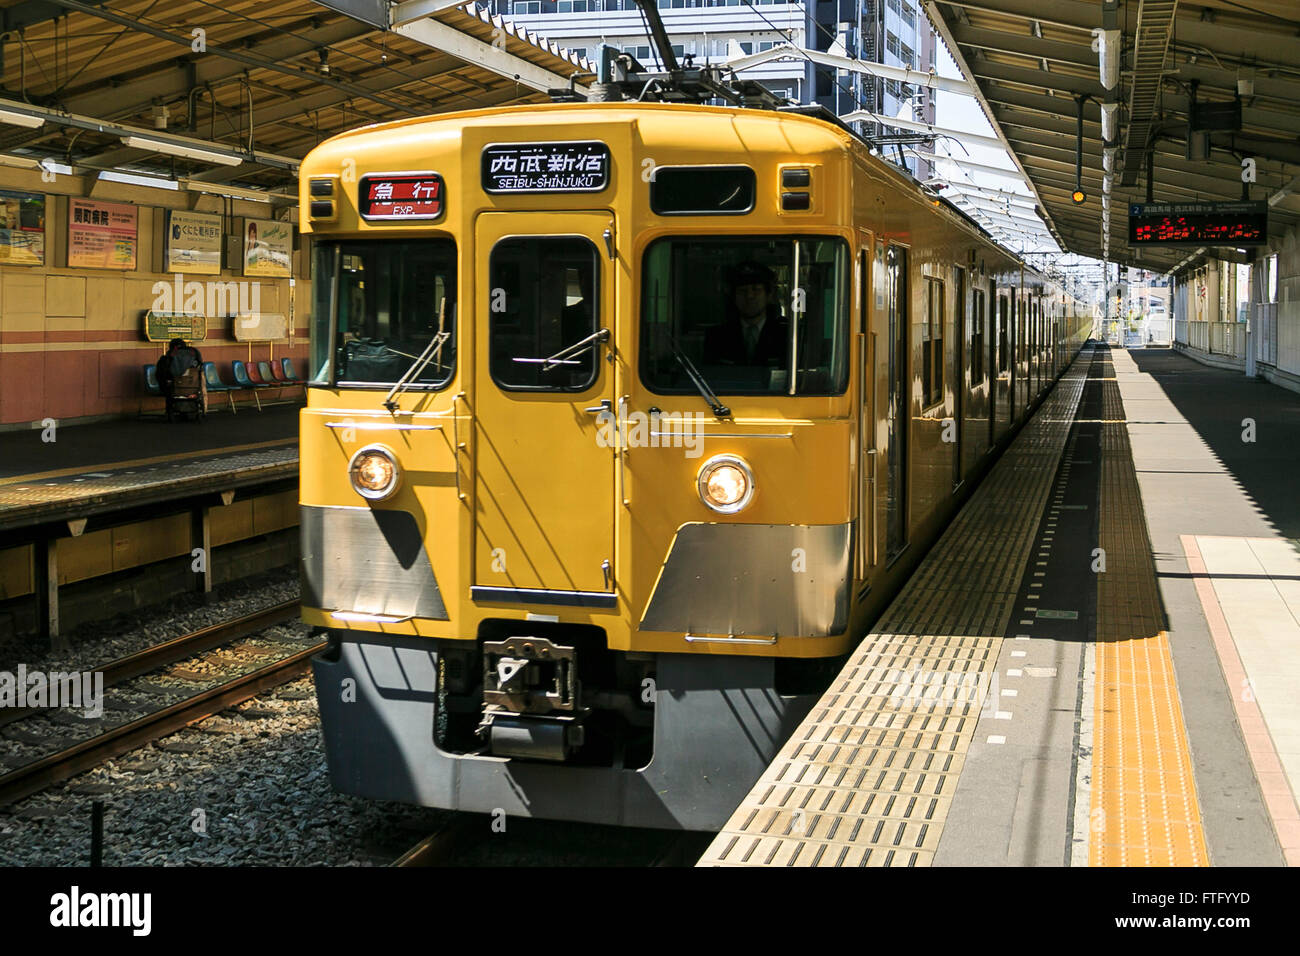 A yellow Seibu train arrives at Musashi-Seki station on March 29, 2016, Tokyo, Japan. Seibu Railway corporation announced that they will rent out entire carriages for party groups, on its Seibu Shinjuku, Ikebukuro, Hajima and Kokubunji Lines, allowing the group to choose which station to be picked up at and to be dropped off at. The special party service is aimed at alumni groups especially those that previously studied and commuted along one of the lines. In collaboration with Syoya Inc., a company specialised in organising alumni parties, the train company is taking bookings through till May Stock Photo